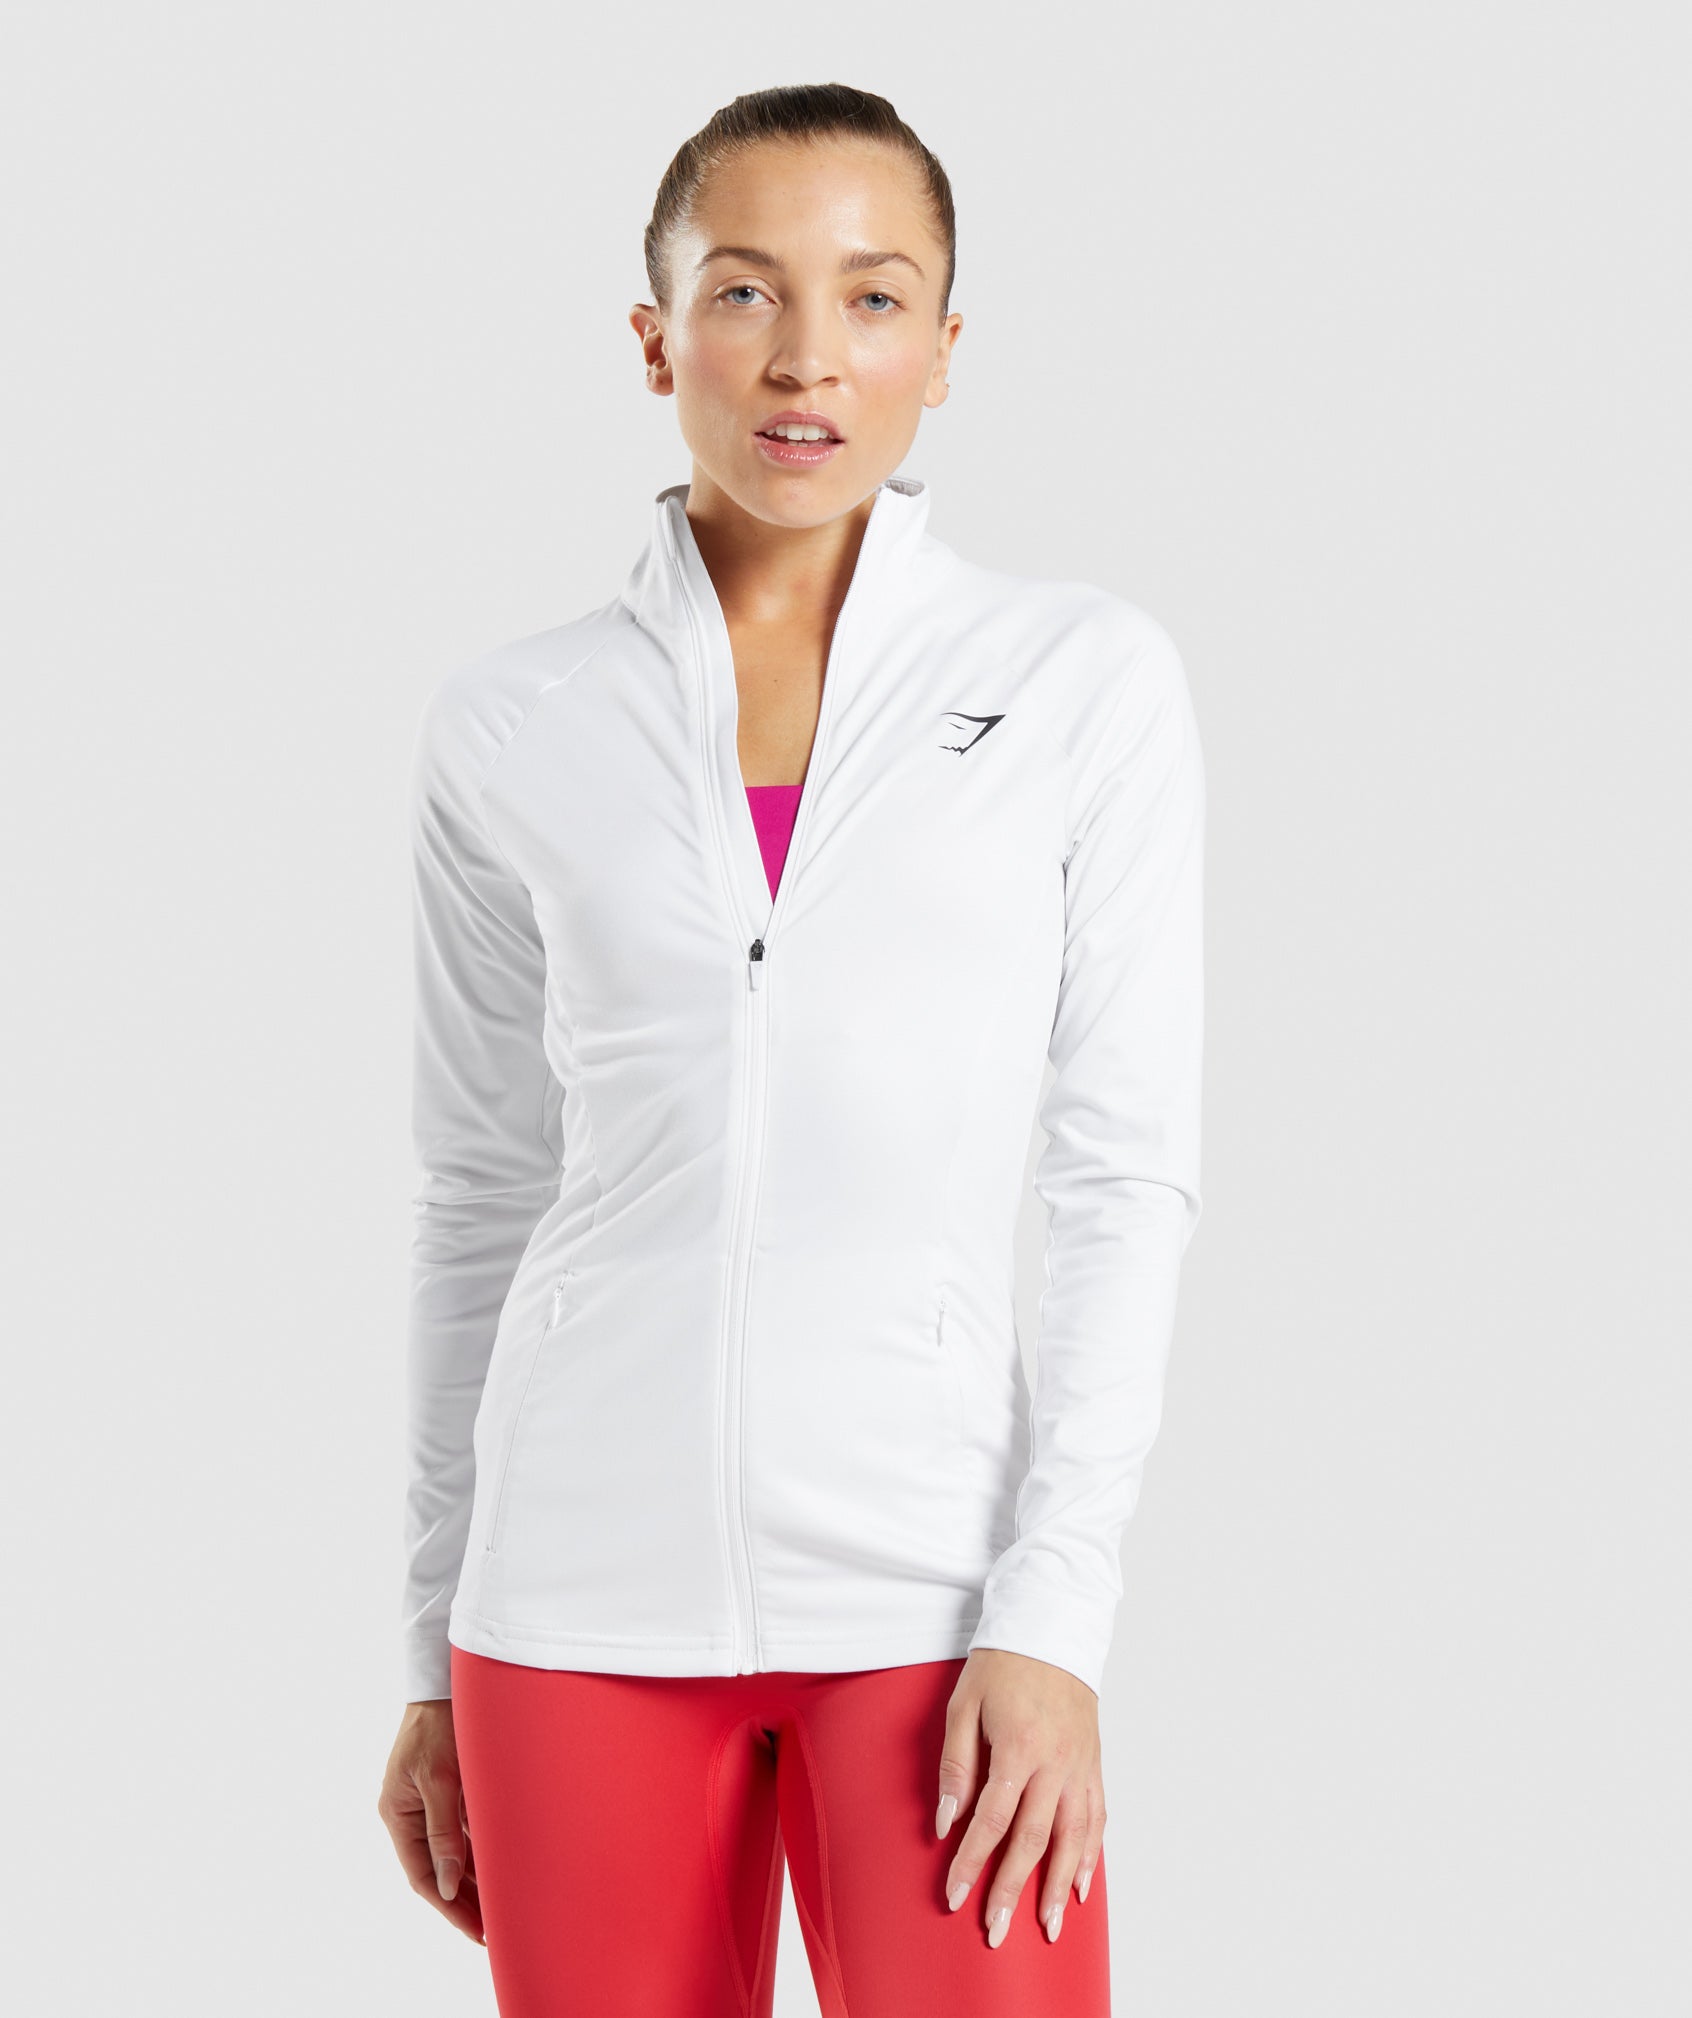 Training Jacket in White - view 1